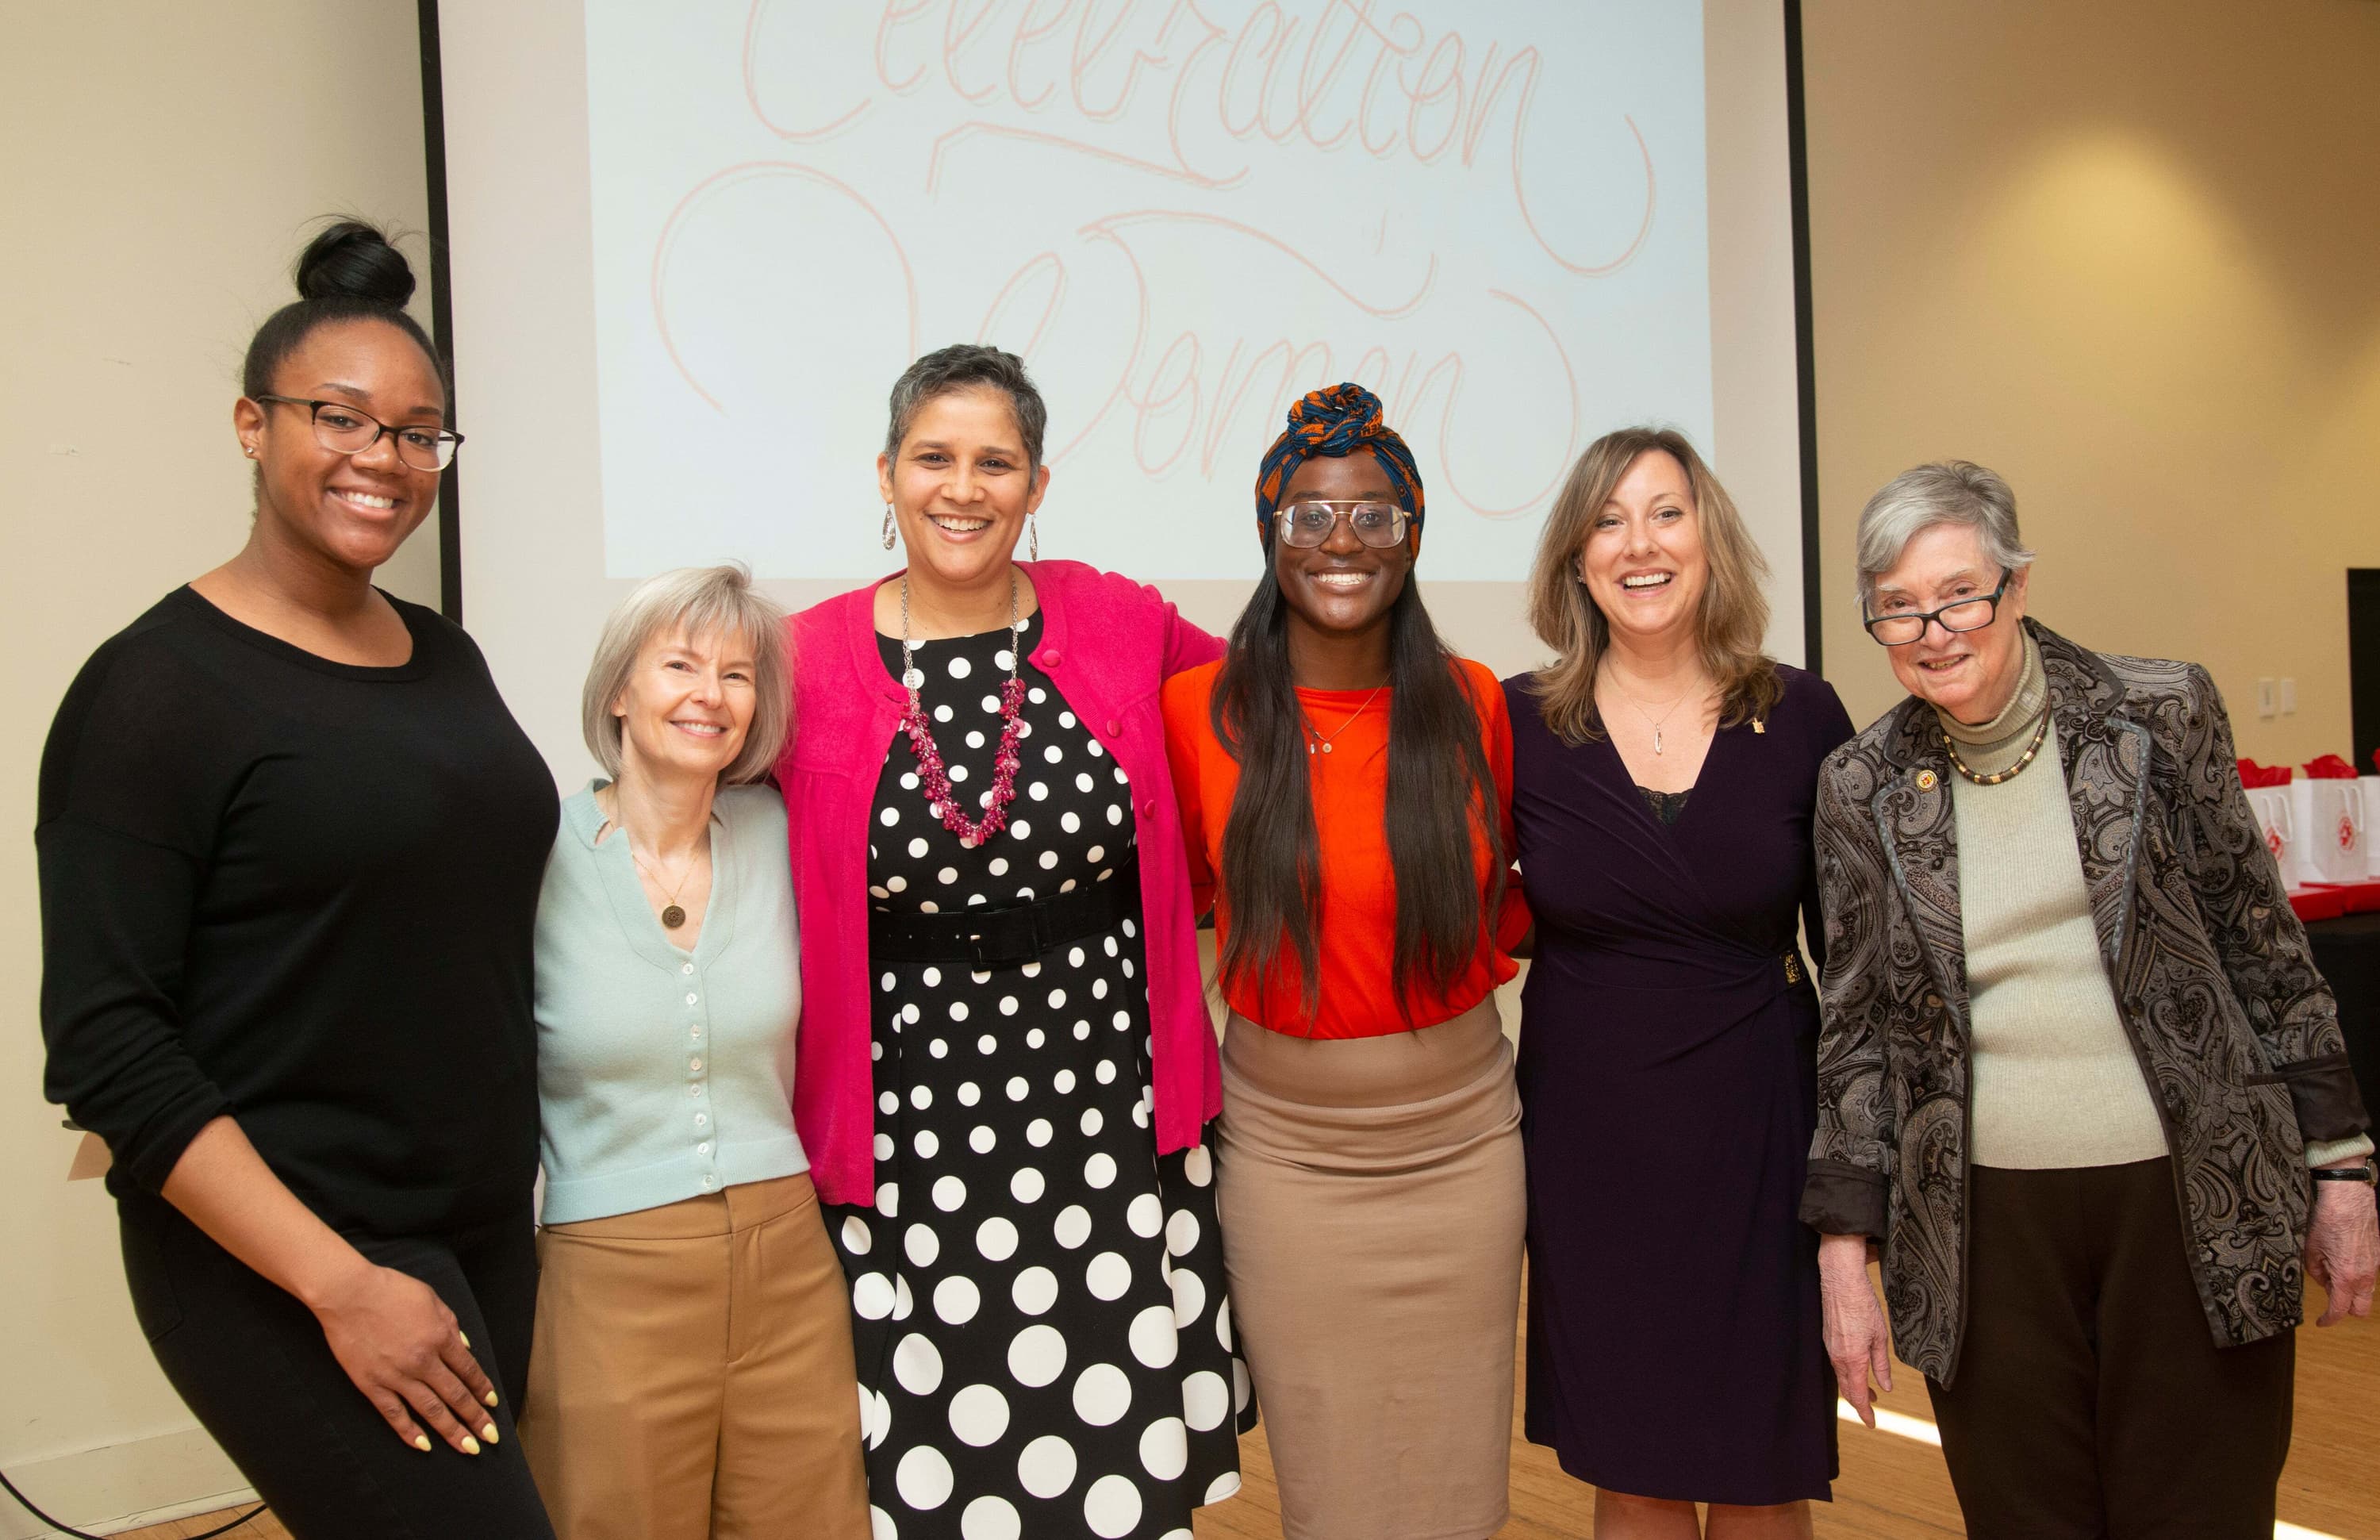 2019 Women of Influence Award winners: Christina Sessoms, Elisabeth Smela, Cynthia Edmunds, Ugochi Chinemere, Andrea Goodwin, and Ellin Scholnick (Chair, President’s Commission of Women’s Issues)